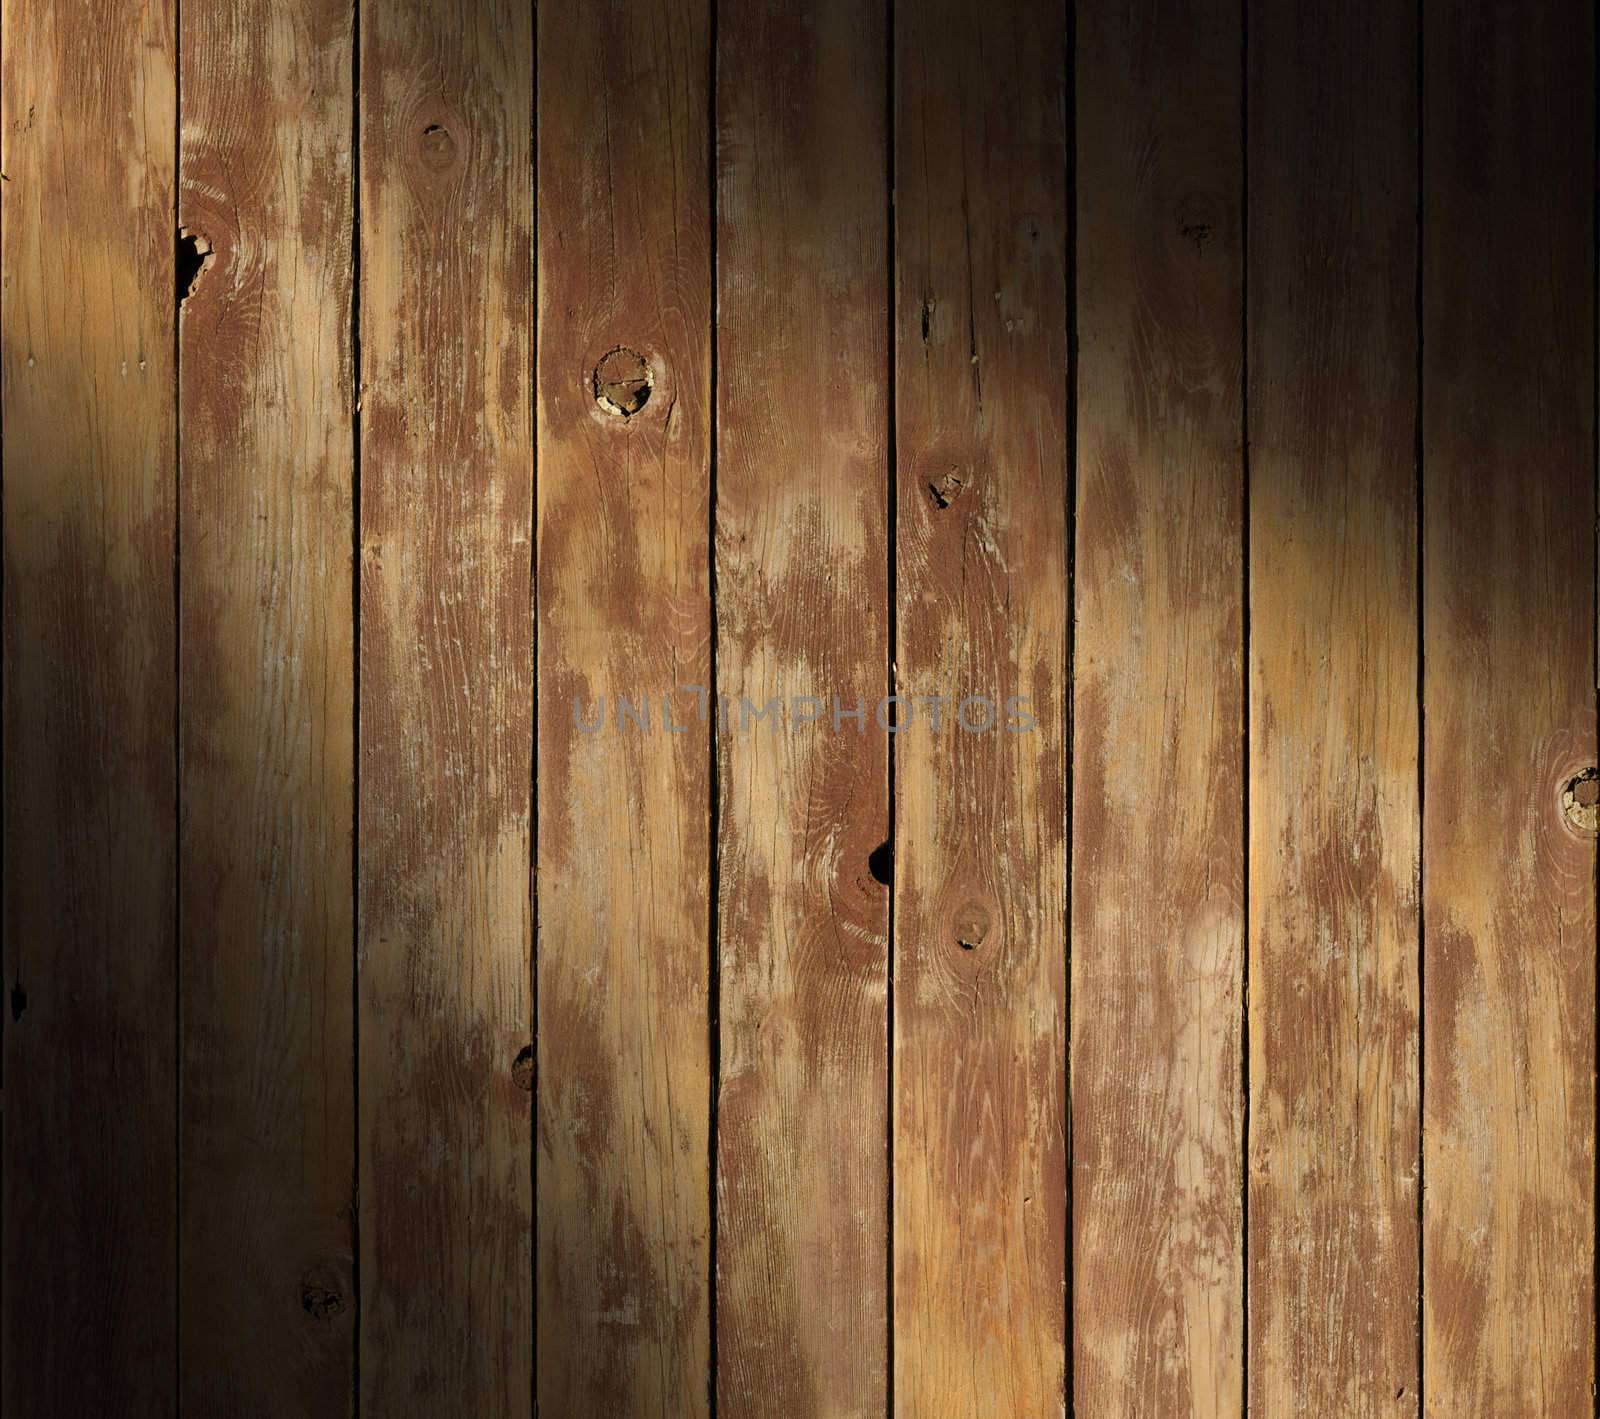 Distressed wooden surface diagonally lit with boards running vertically.